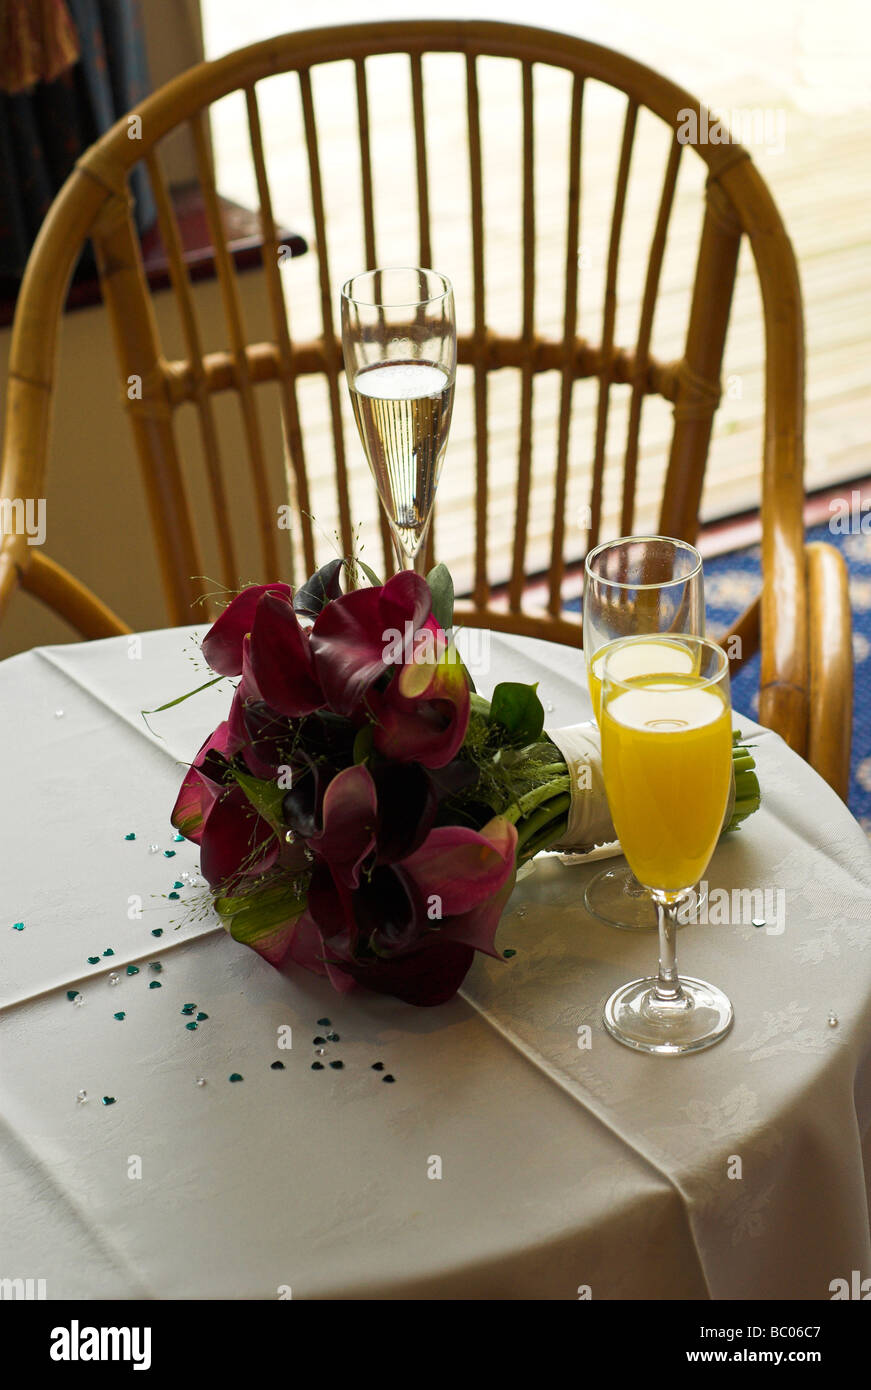 Wine glasses and bouquet on table. Stock Photo